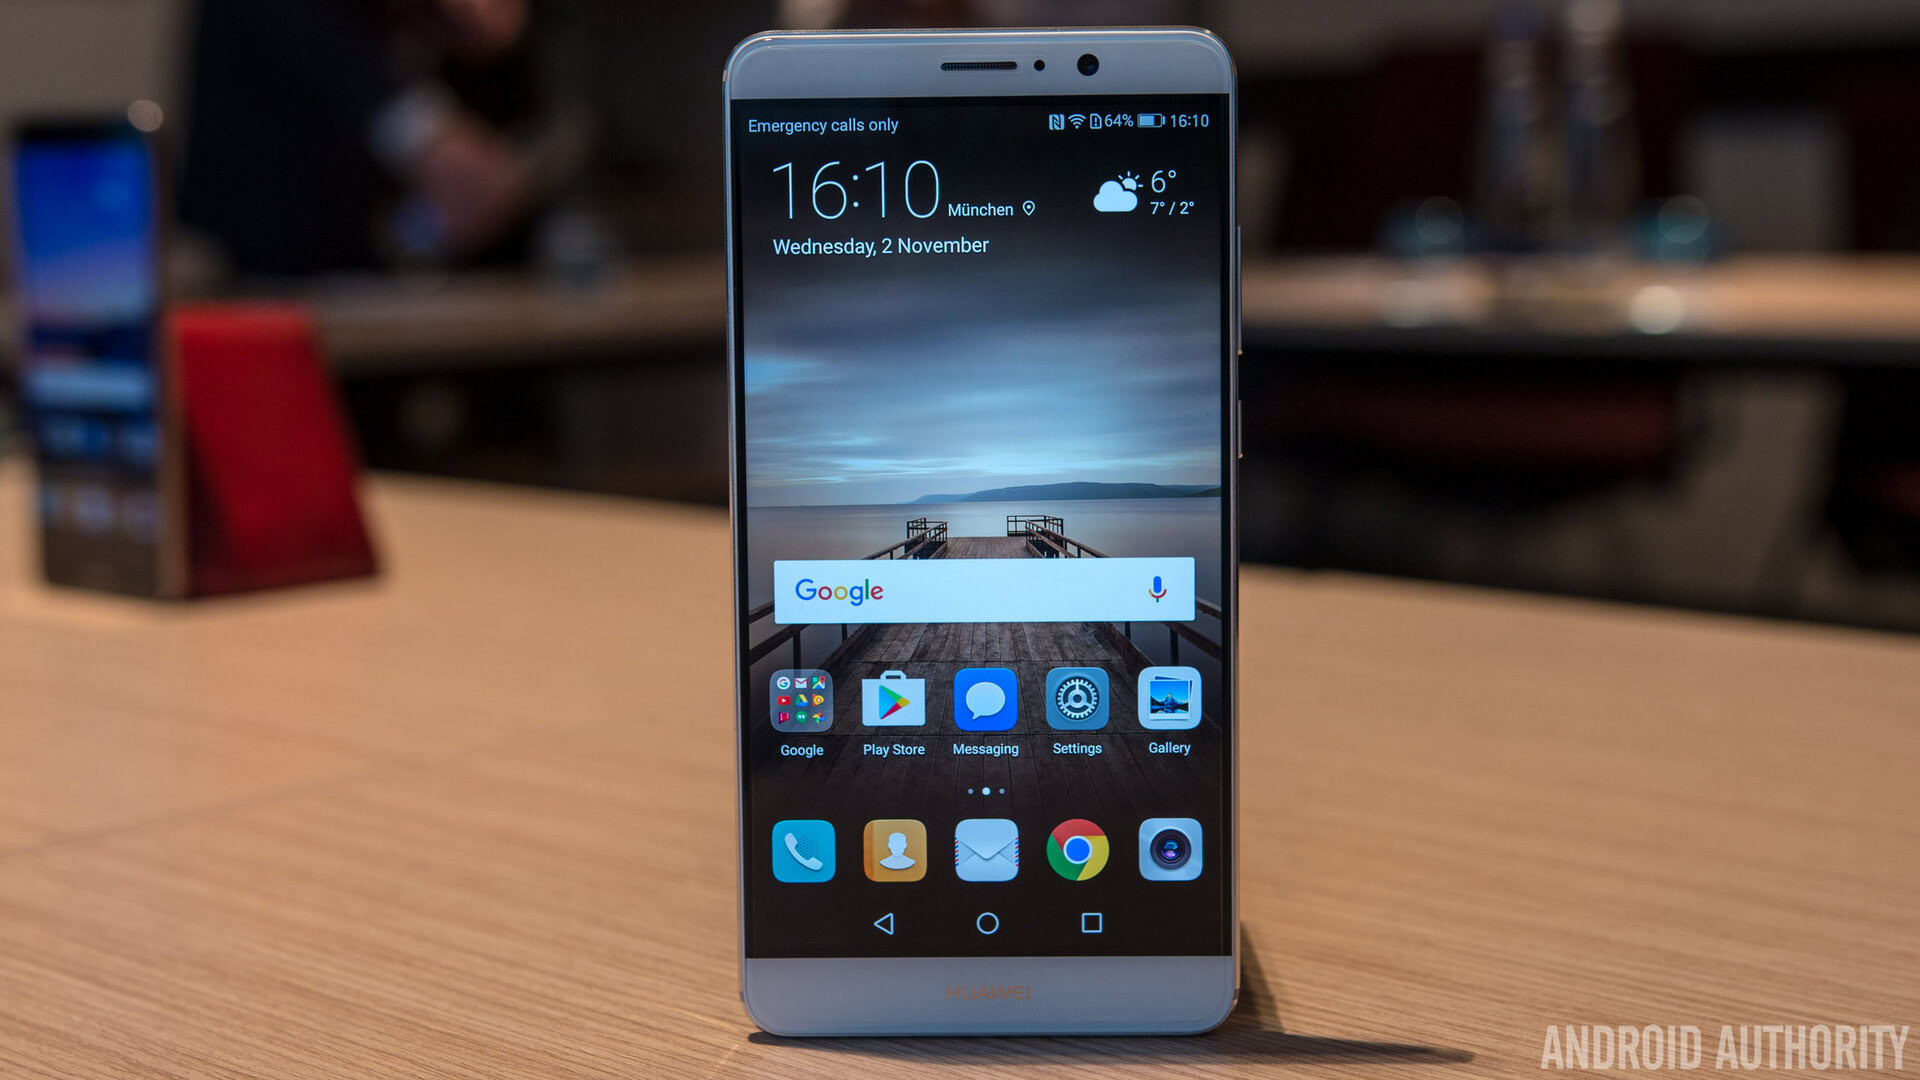 HUAWEI Mate 9 specs, price, release date and everything else you